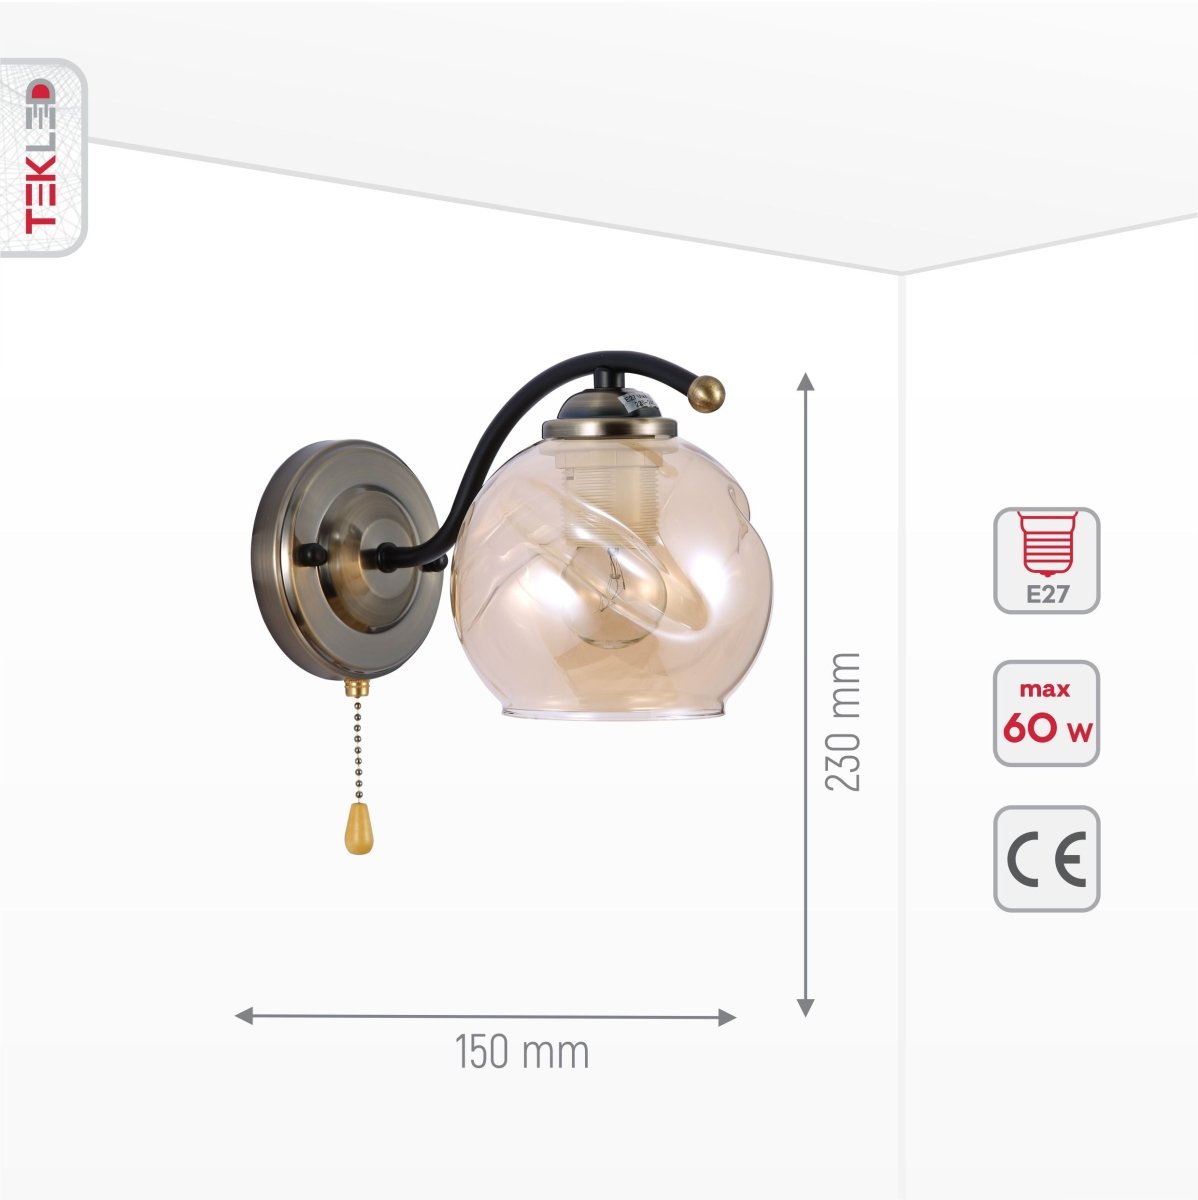 Product dimensions of amber glass black and antique brass wall light e27 and pull down switch